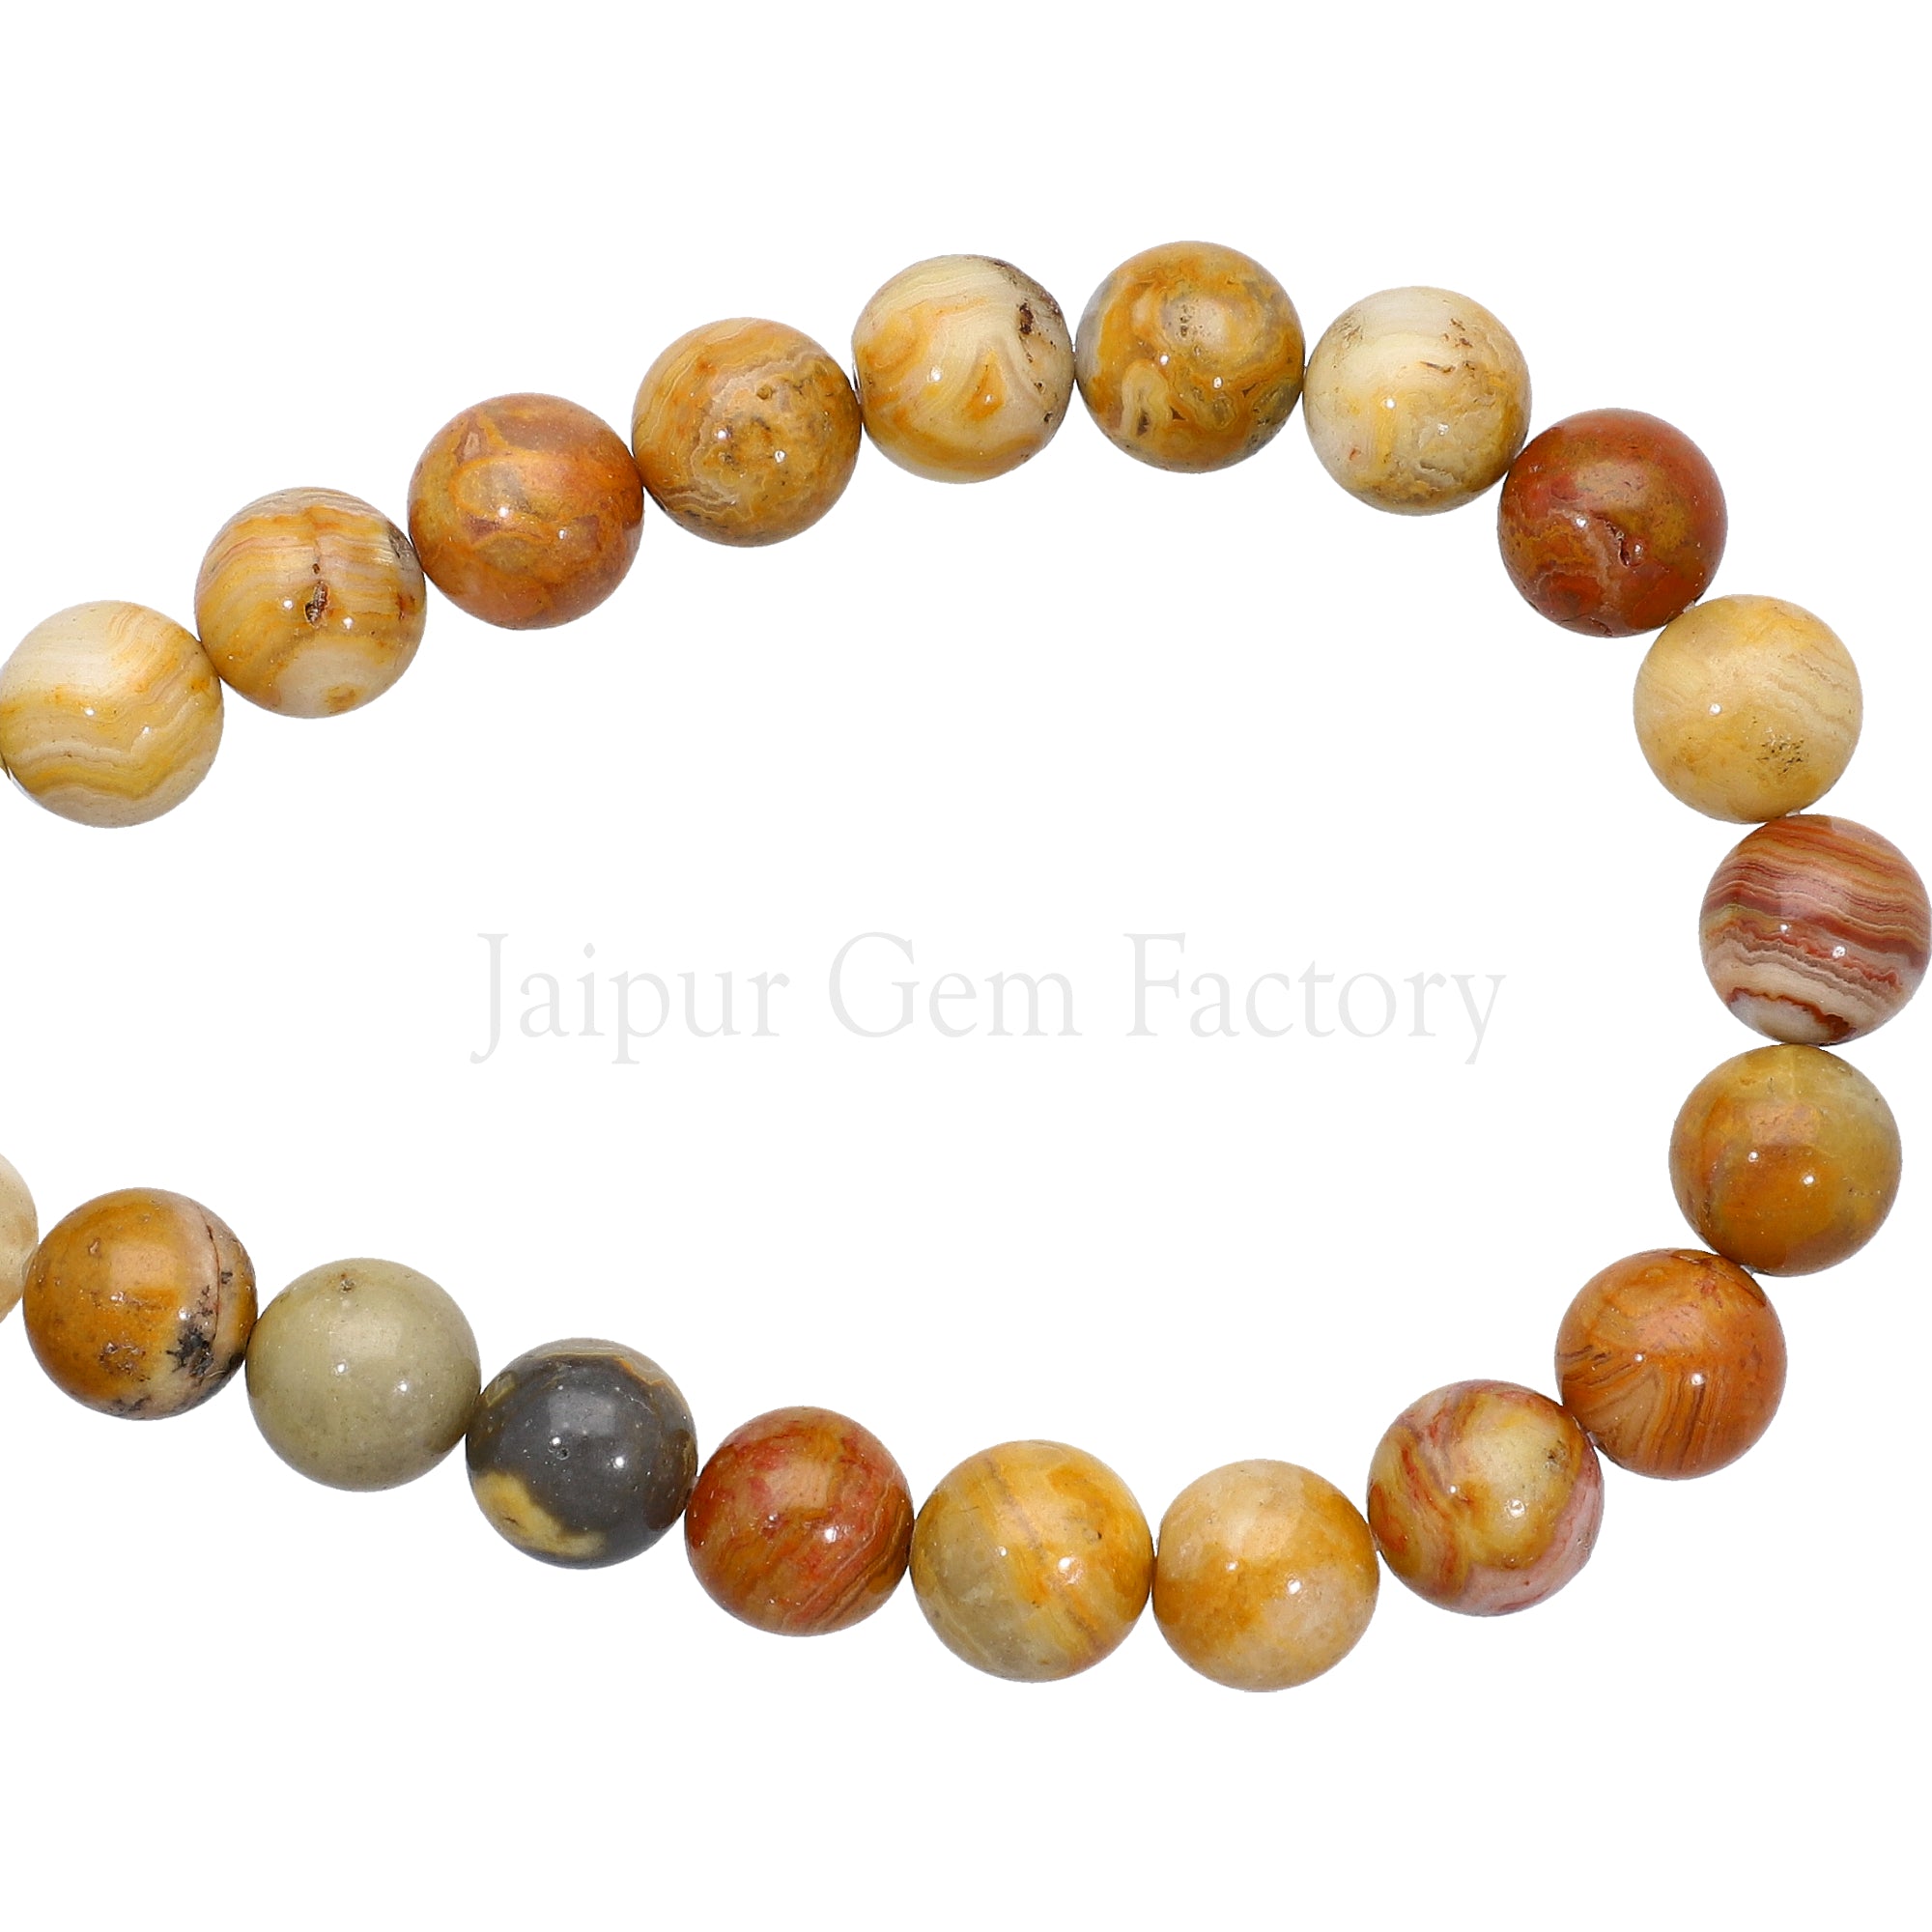 10 MM Crazy Lace Agate Smooth Round Beads 15 Inches Strand